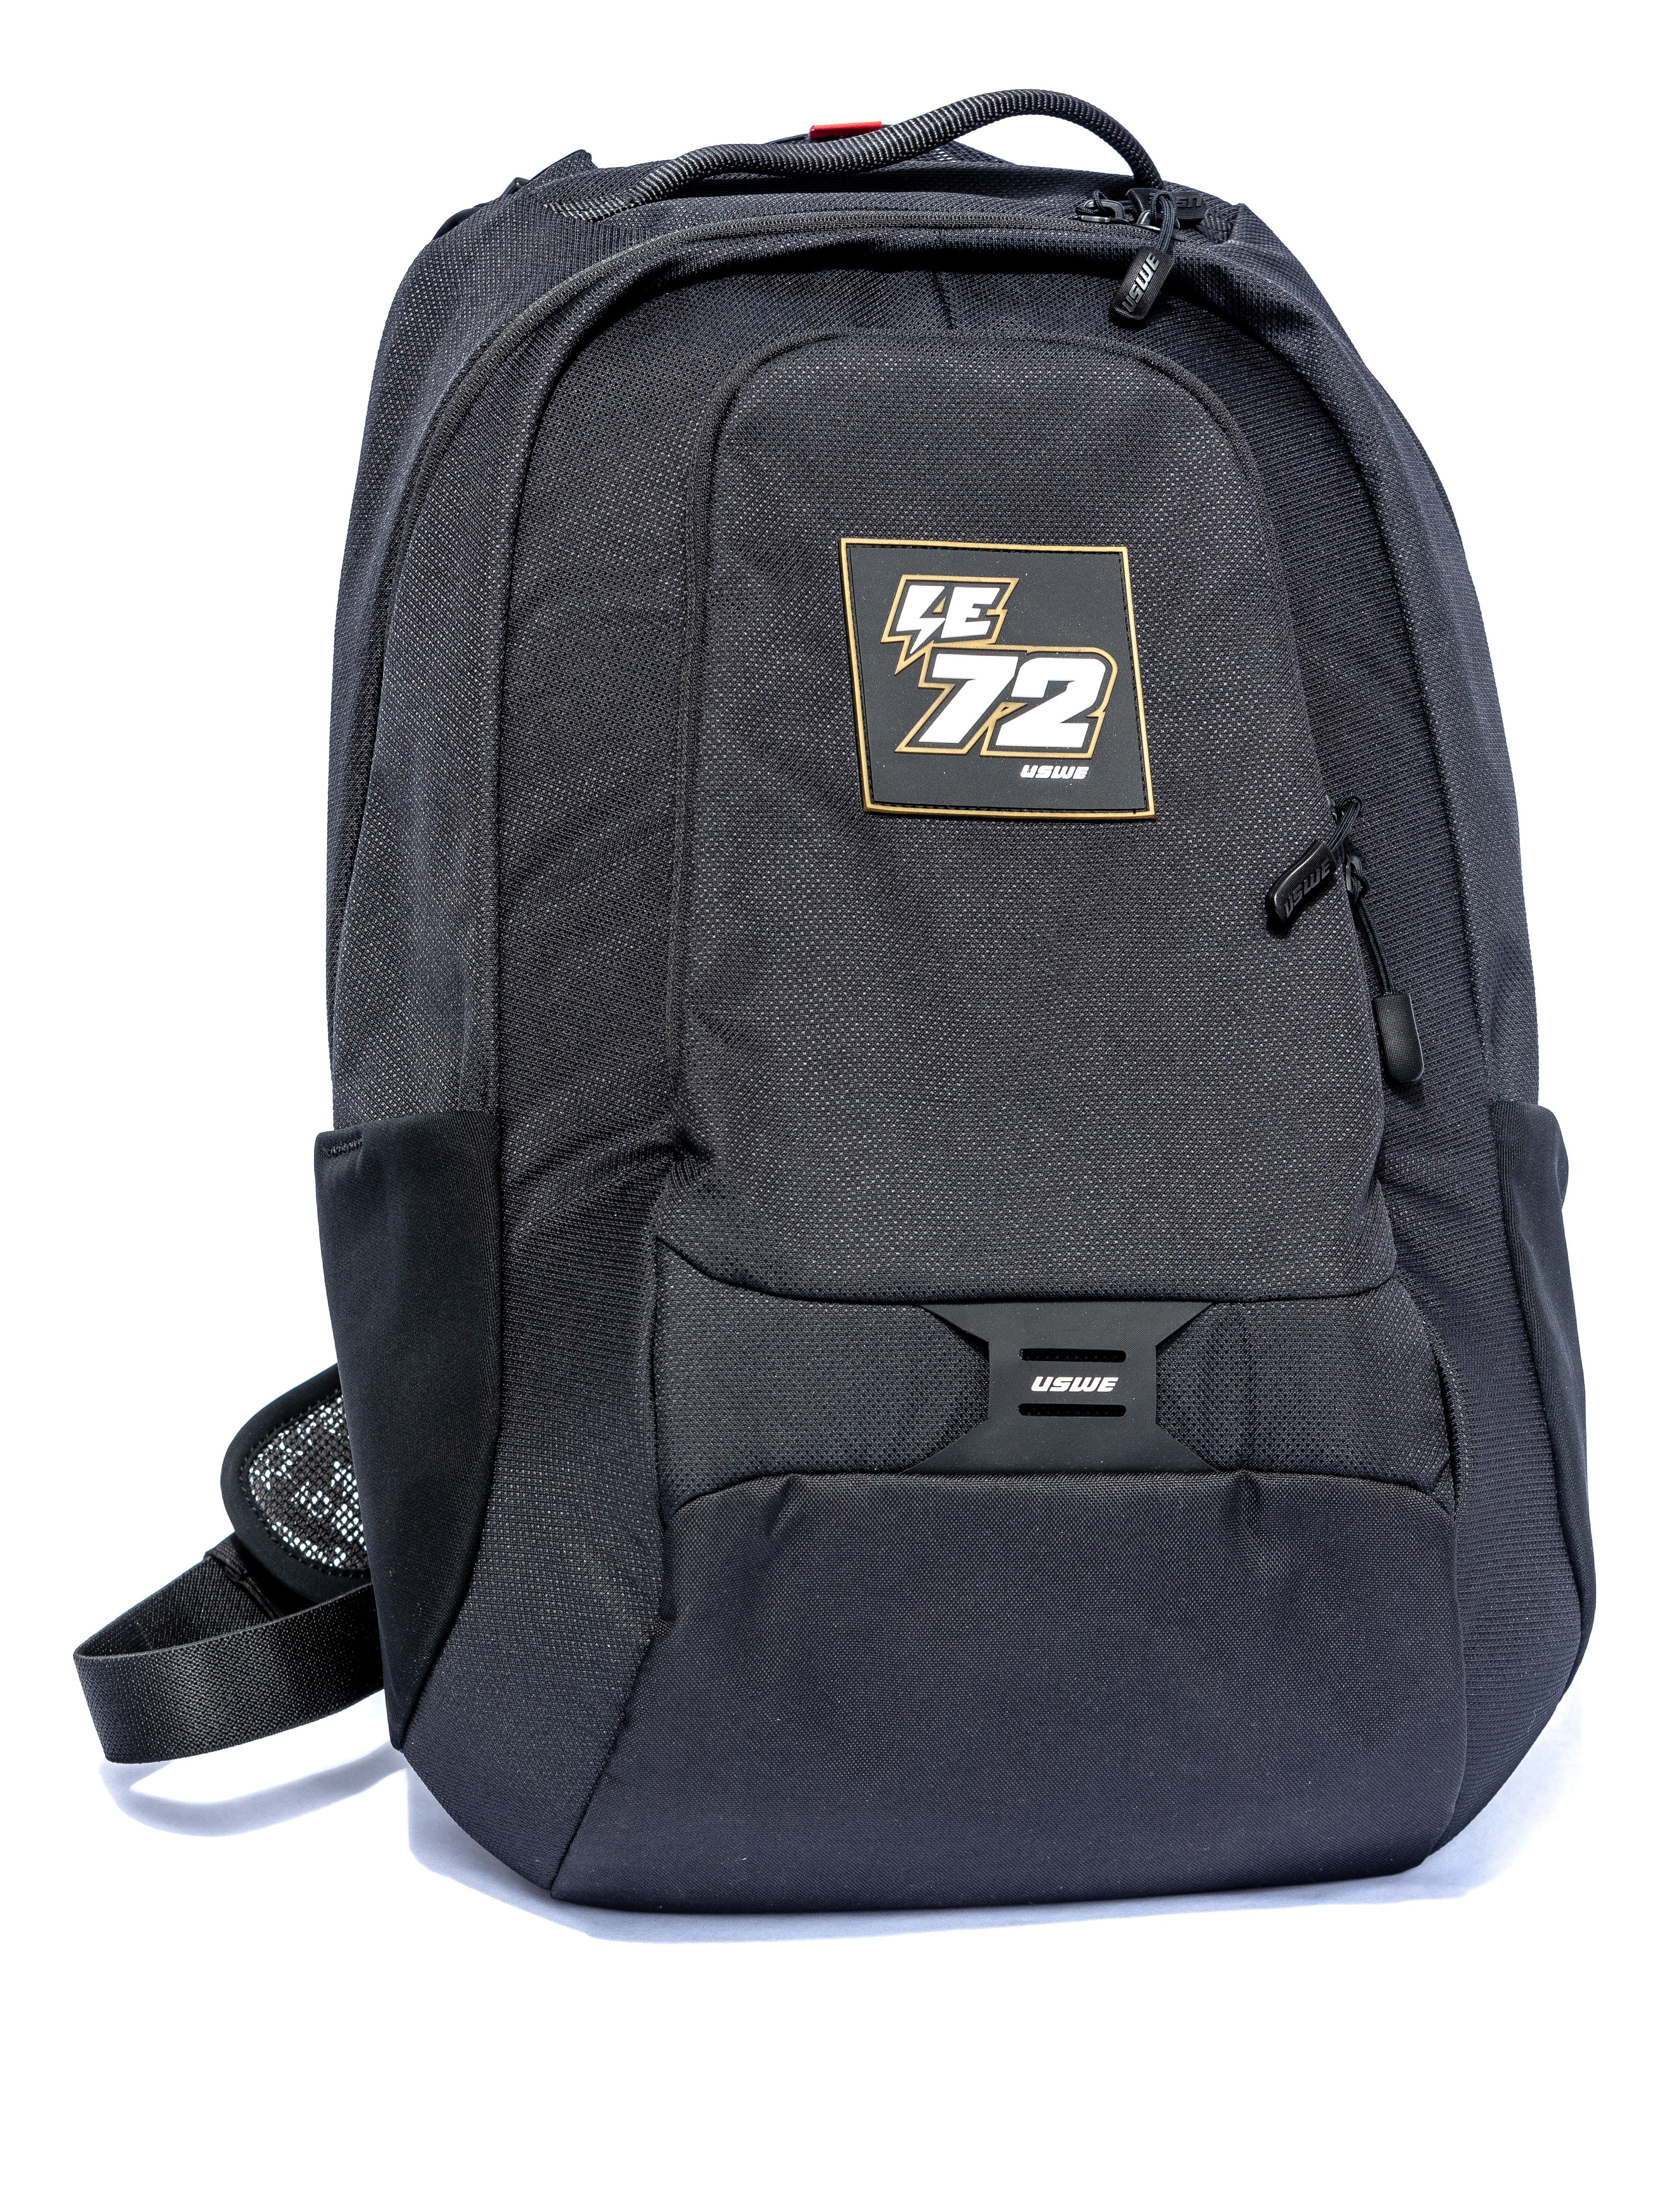 LE72 - backpack